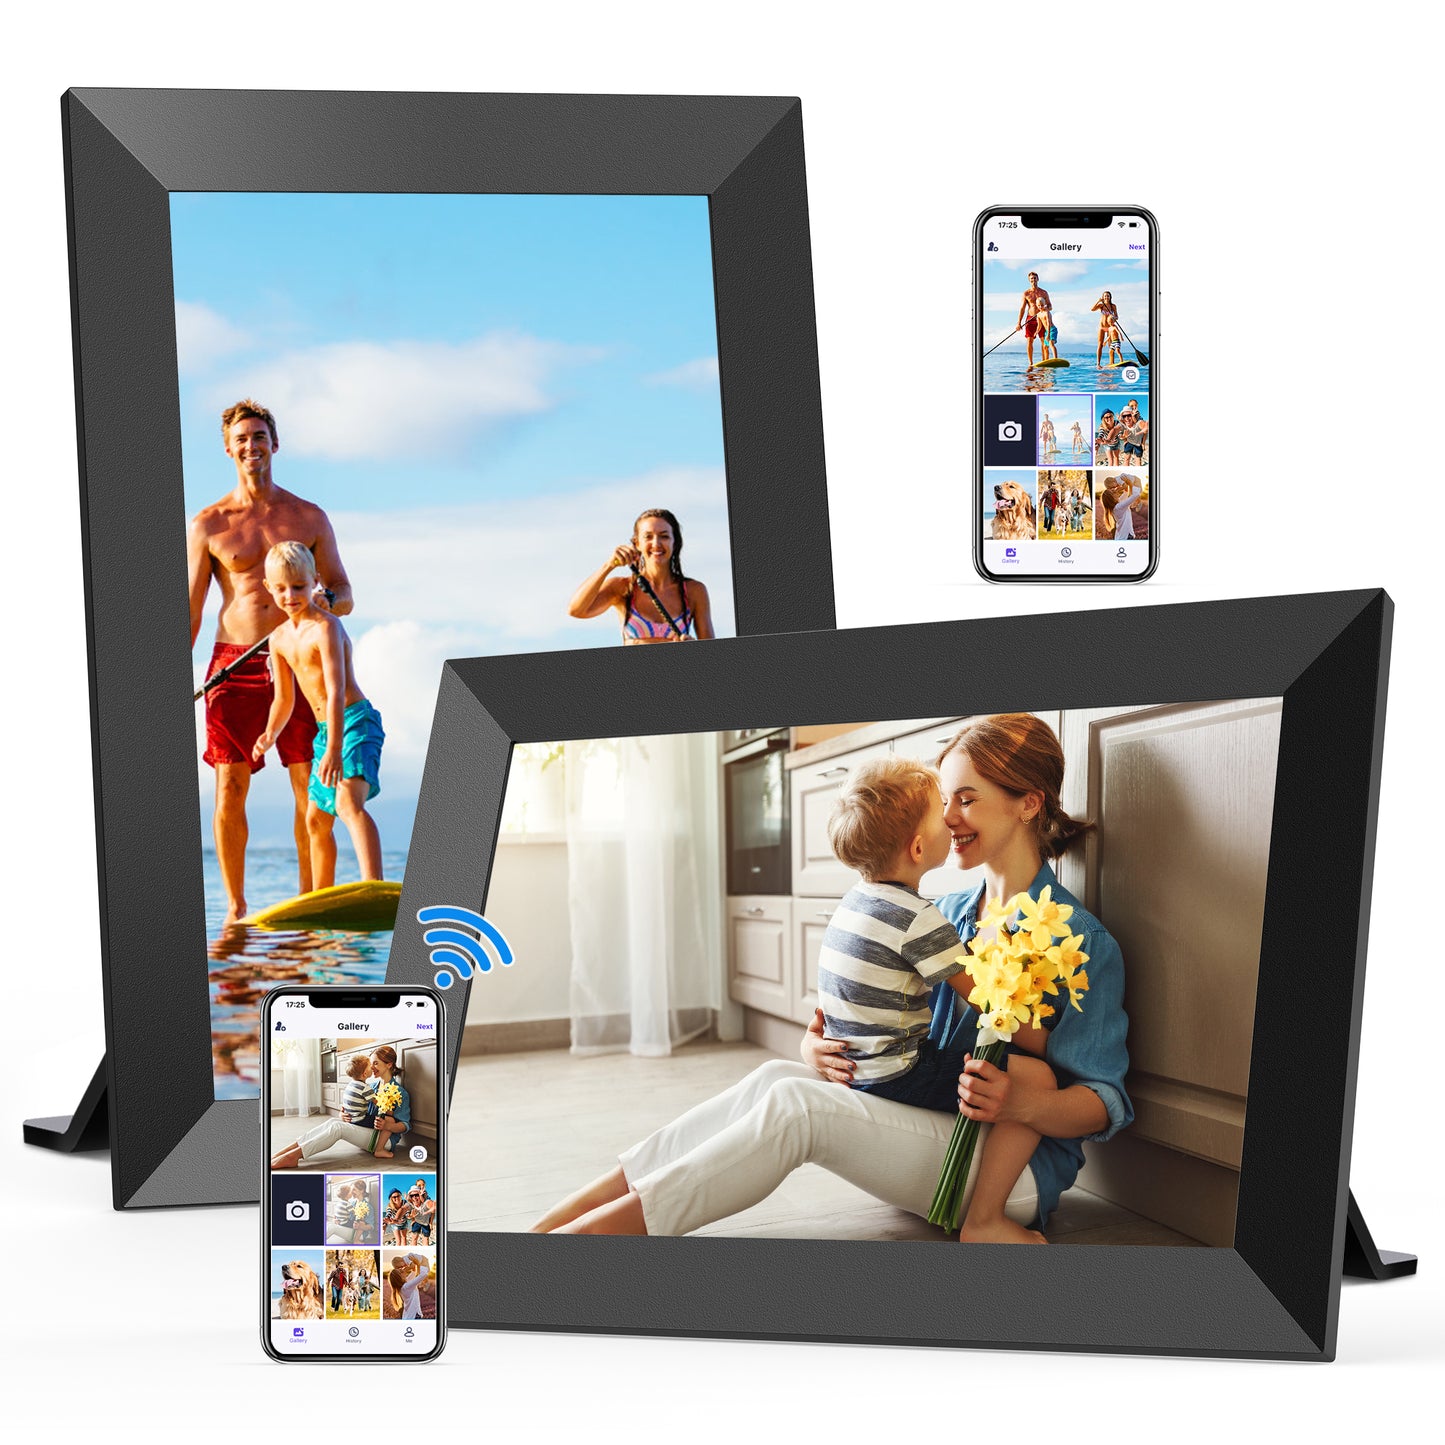 Ricilar 10.1 inch WiFi Digital Photo Frames 2 Pack, Digital Picture Frame with Send Wishes, Built in 32GB Storage, 1280*800 IPS Cloud Display, Auto-Rotate, Wall Mountable, Sincere Gift for Family!